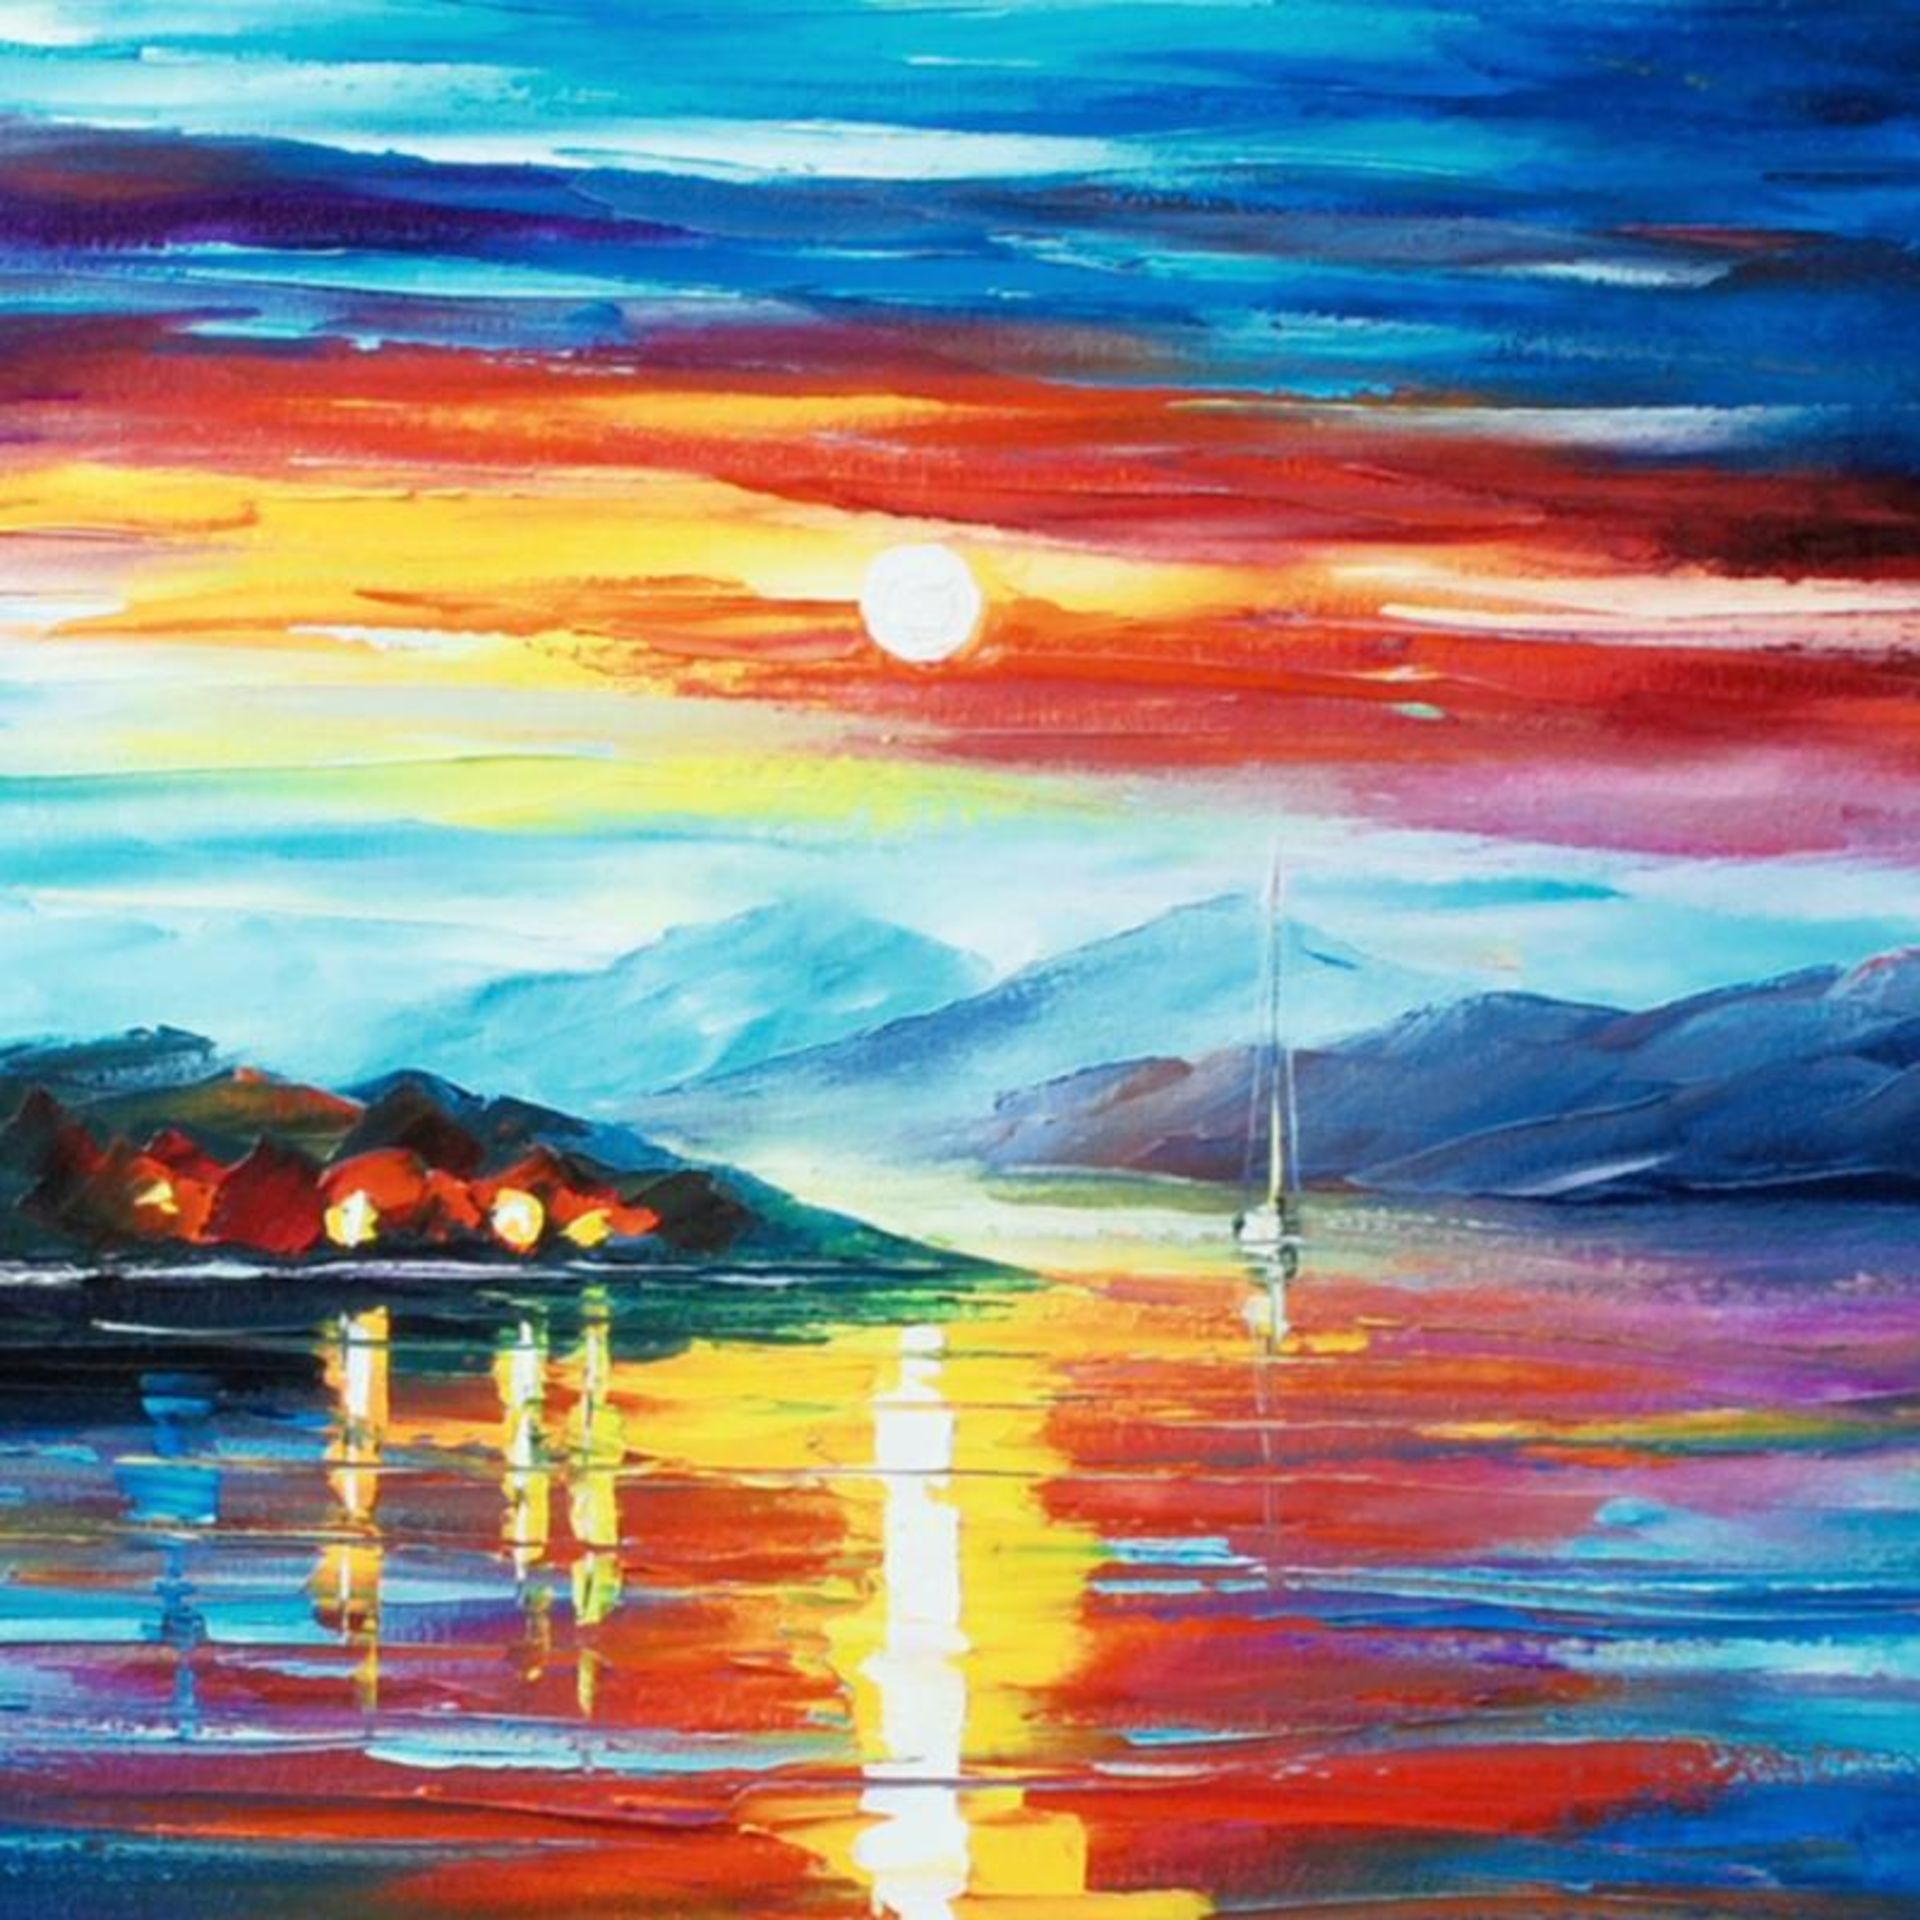 Leonid Afremov (1955-2019) "Never Alone" Limited Edition Giclee on Canvas, Numbe - Image 2 of 3